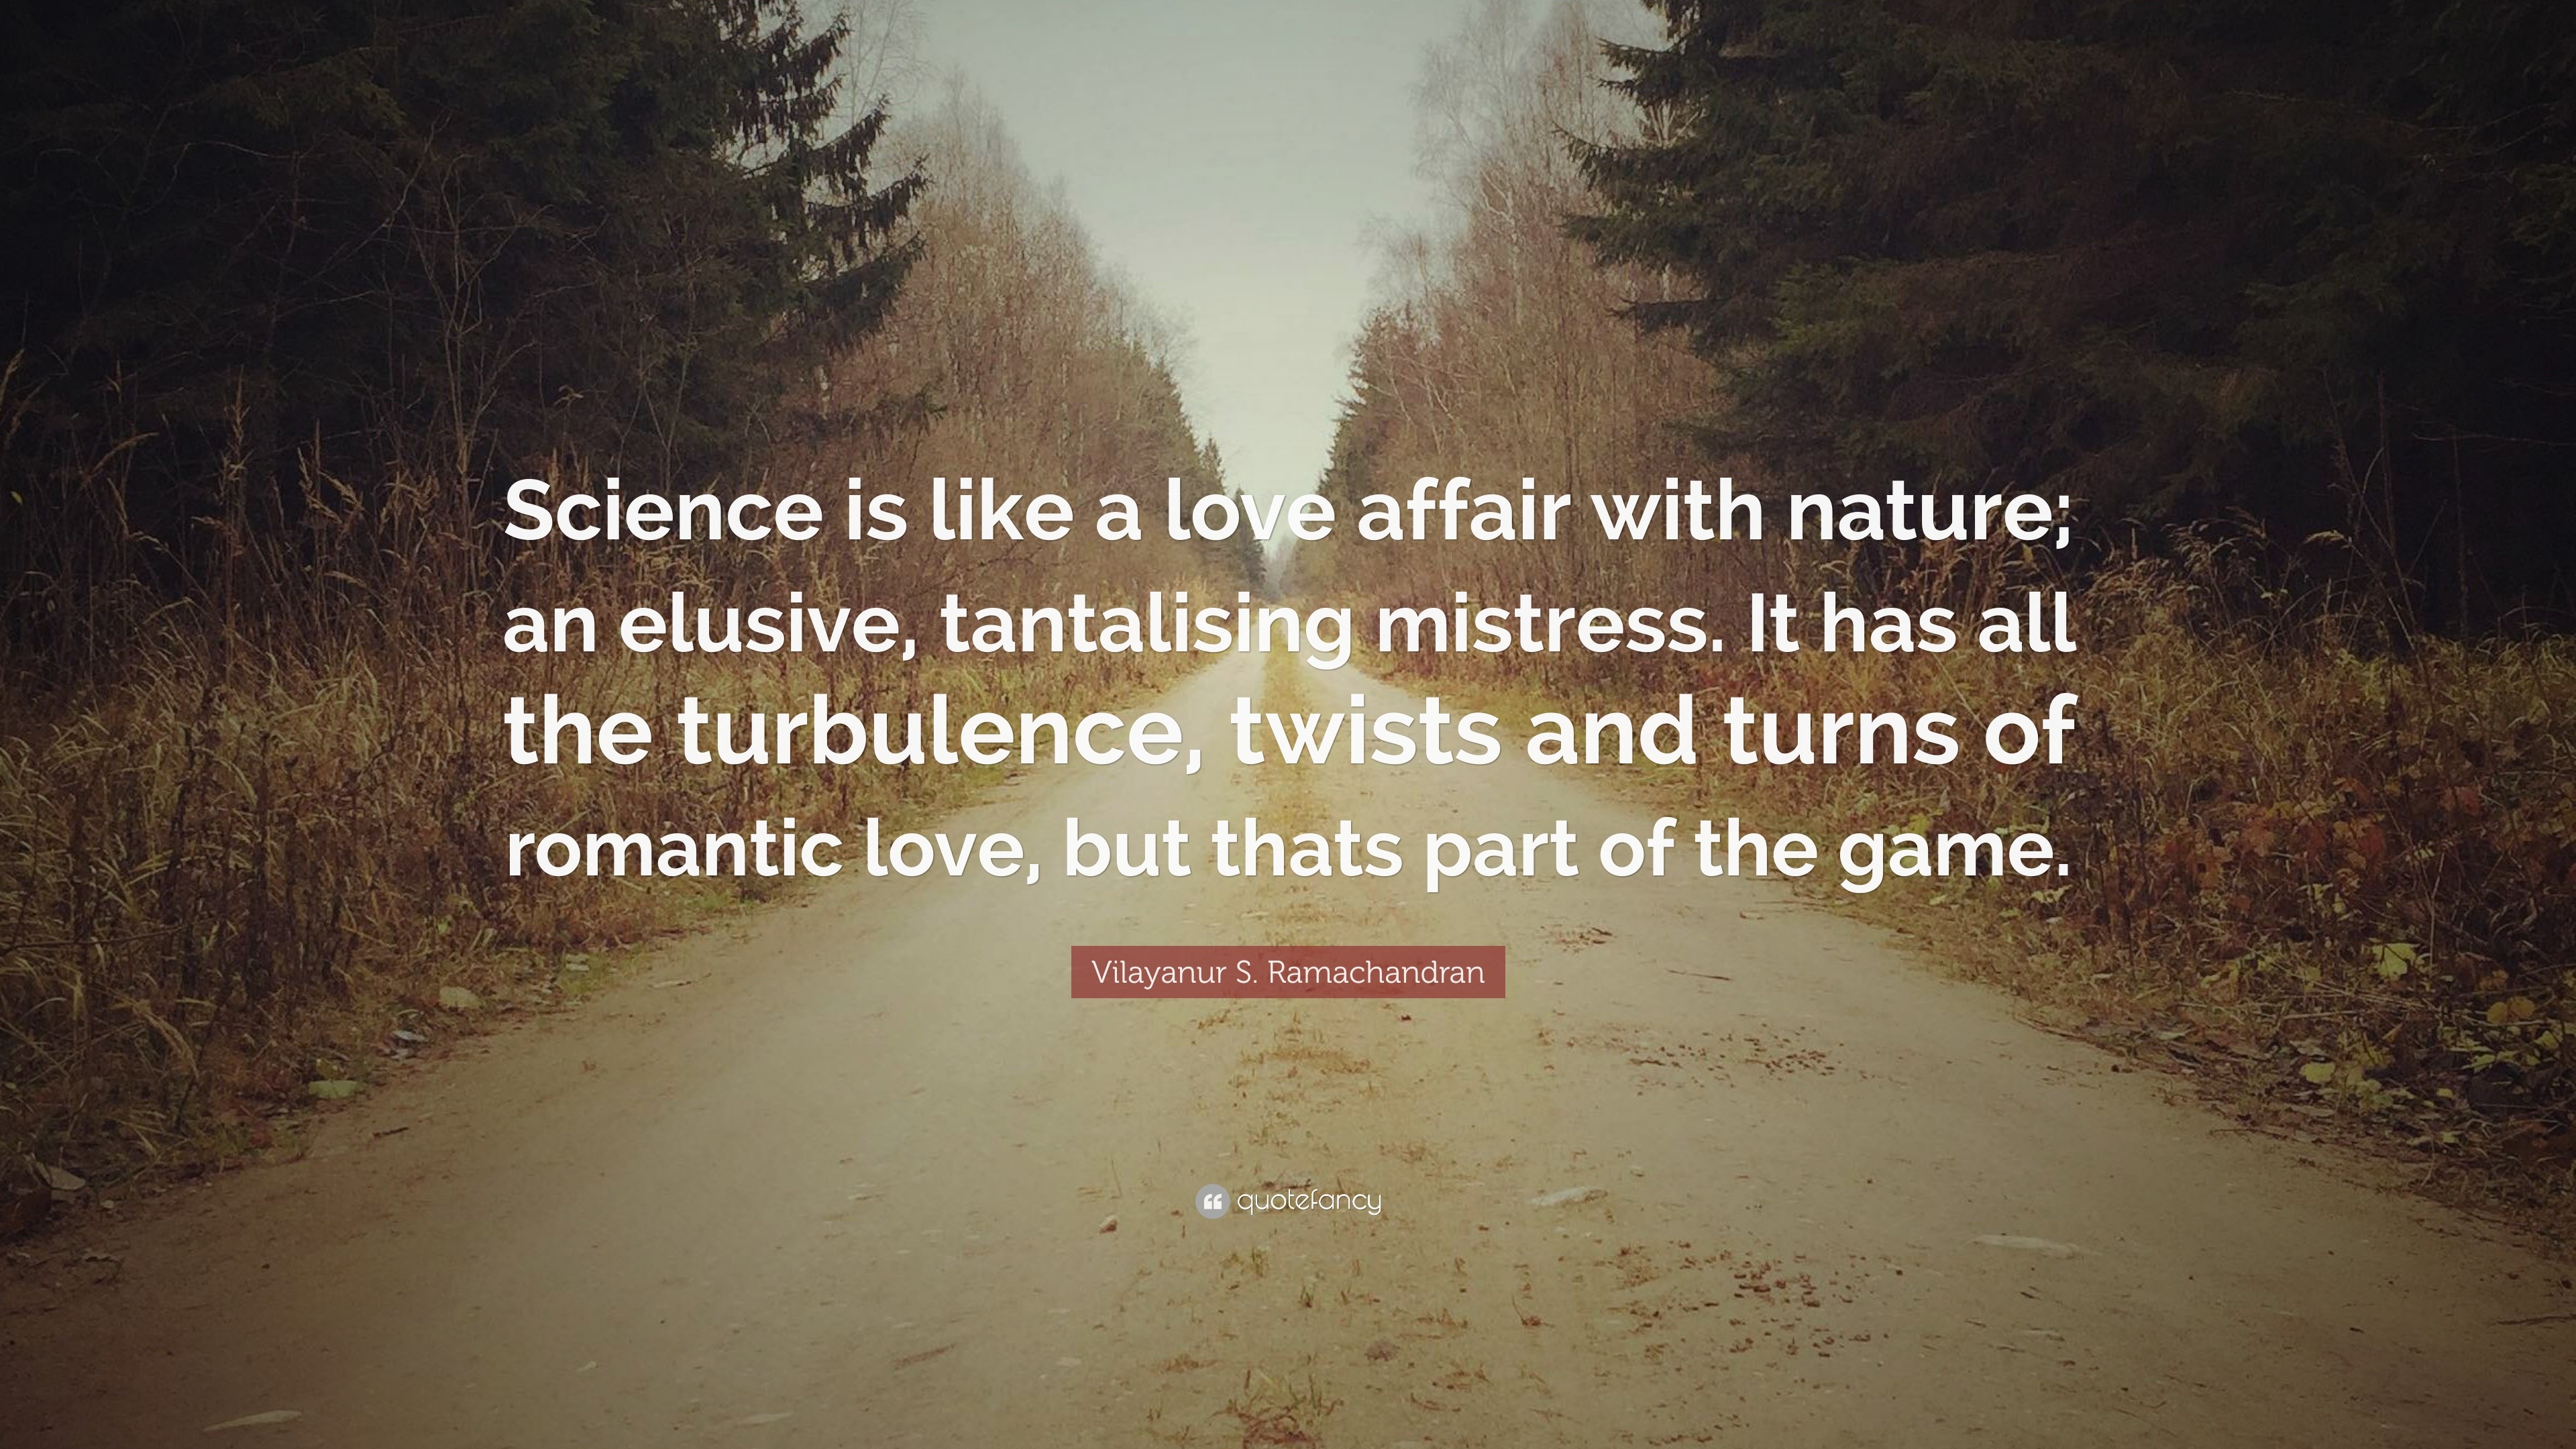 Vilayanur S Ramachandran Quote “Science is like a love affair with nature